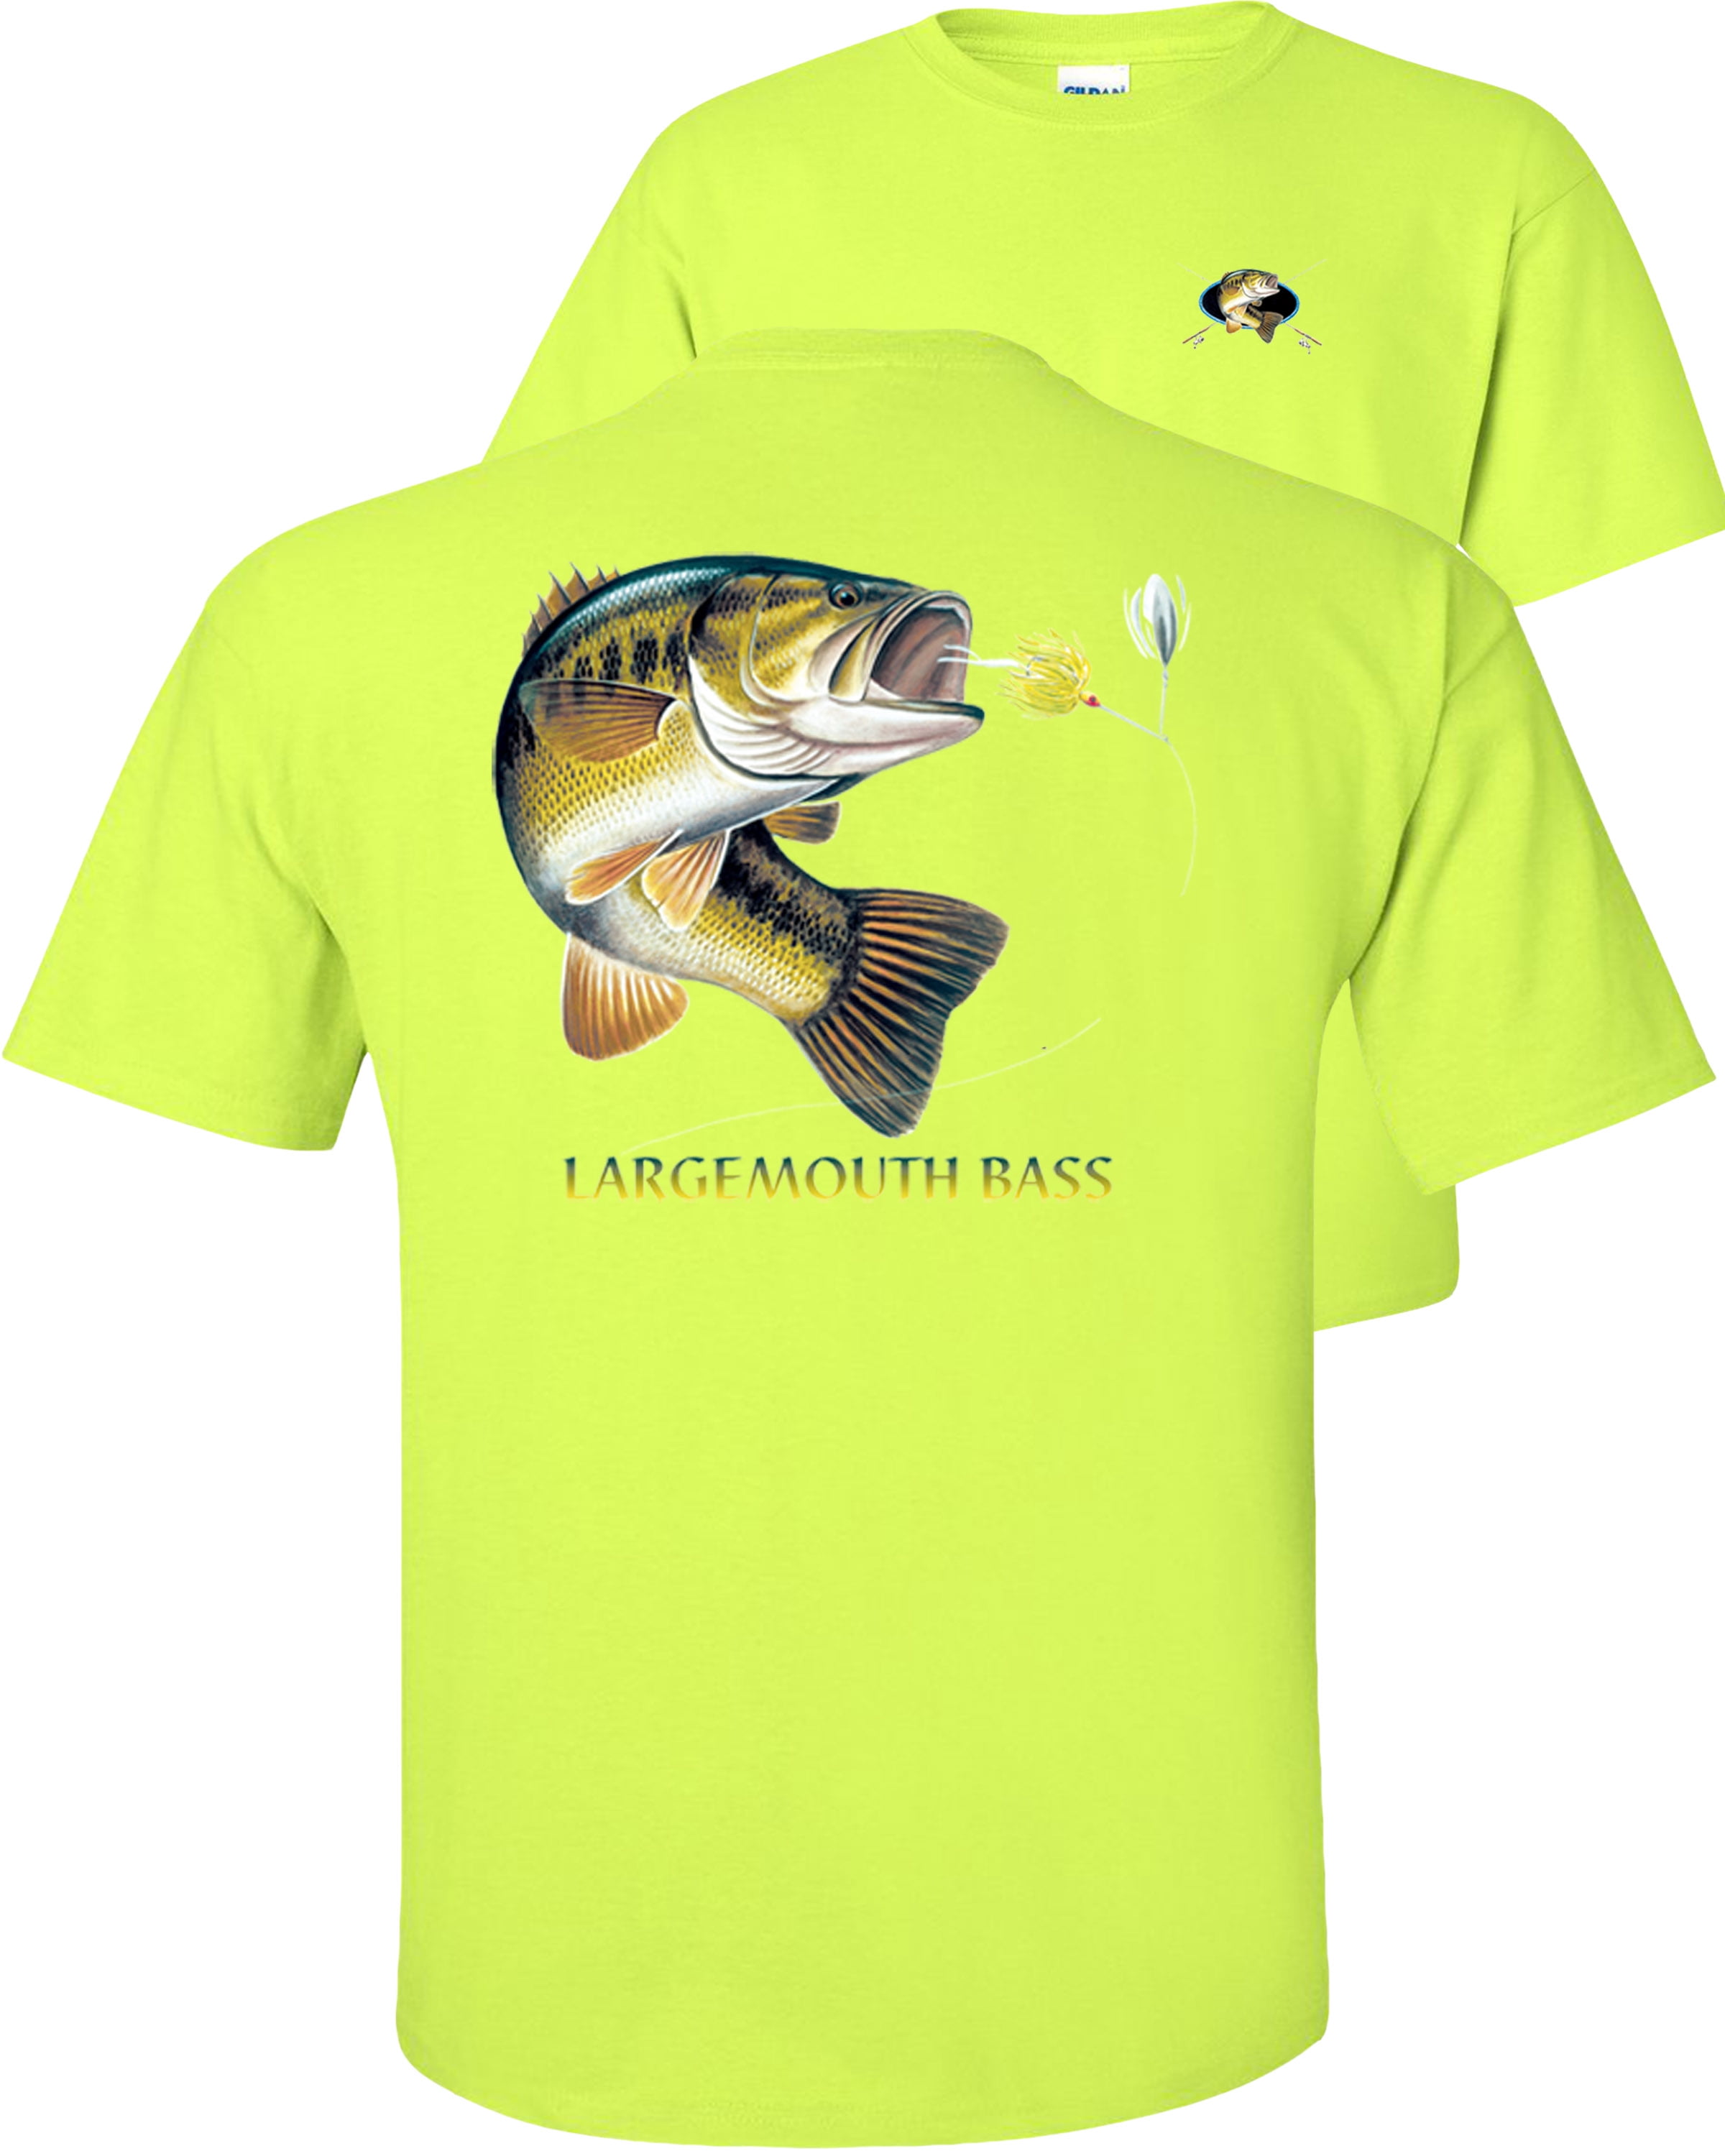 Fair Game Largemouth Bass T-Shirt, combination profile, Fishing Graphic Tee-Safety-2x  